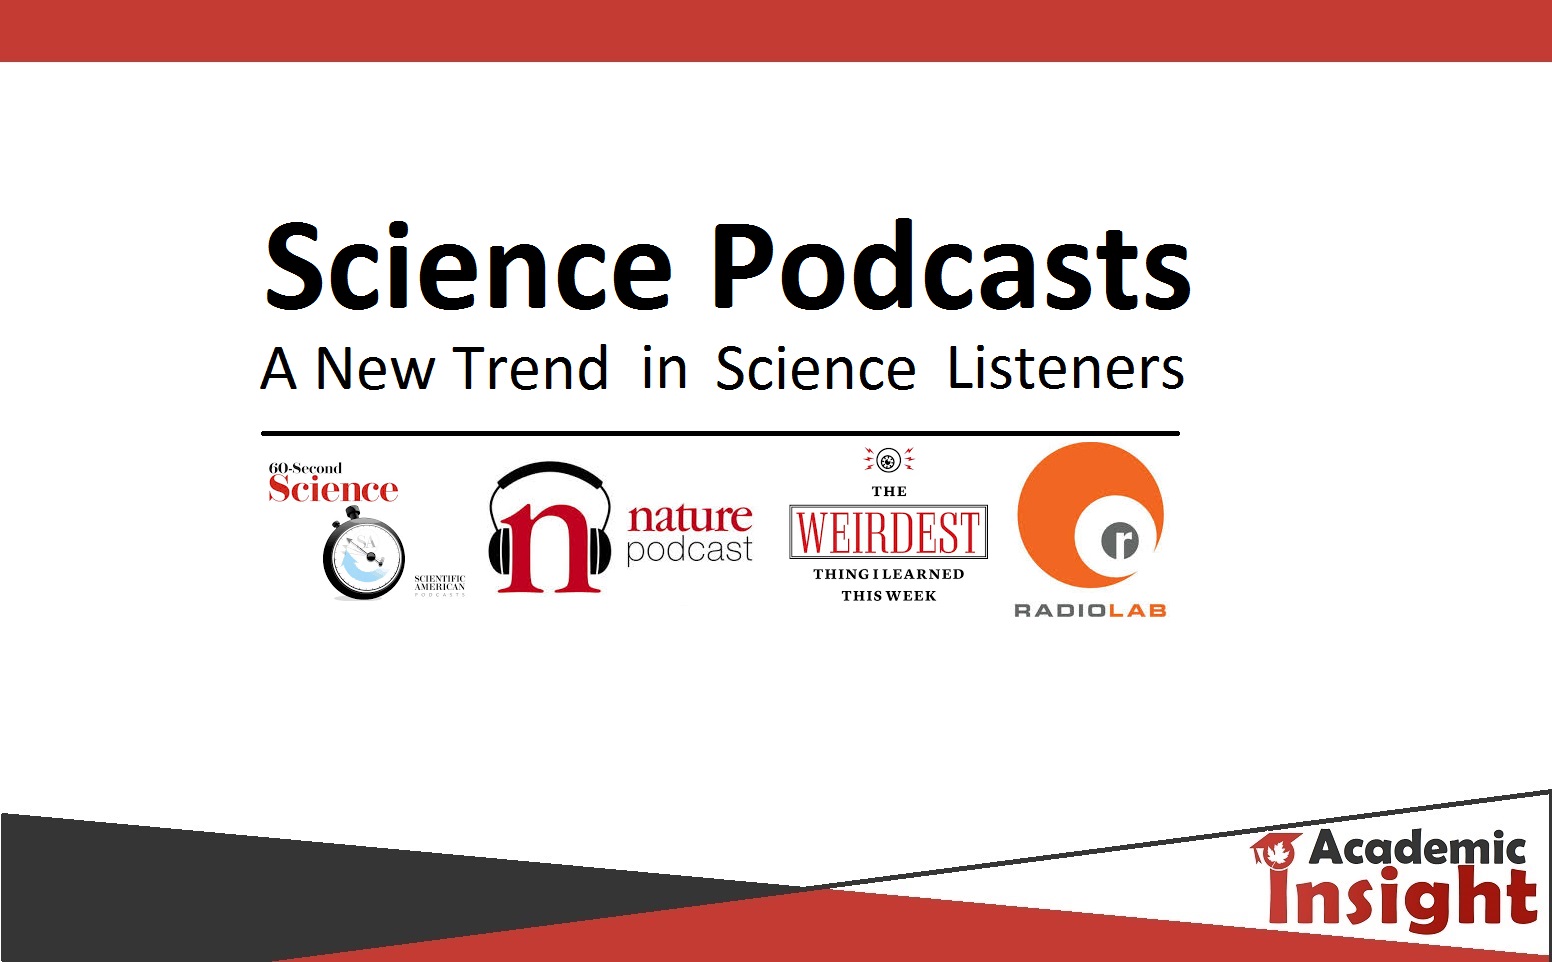 Science Podcasts – A New Trend in Science Listeners